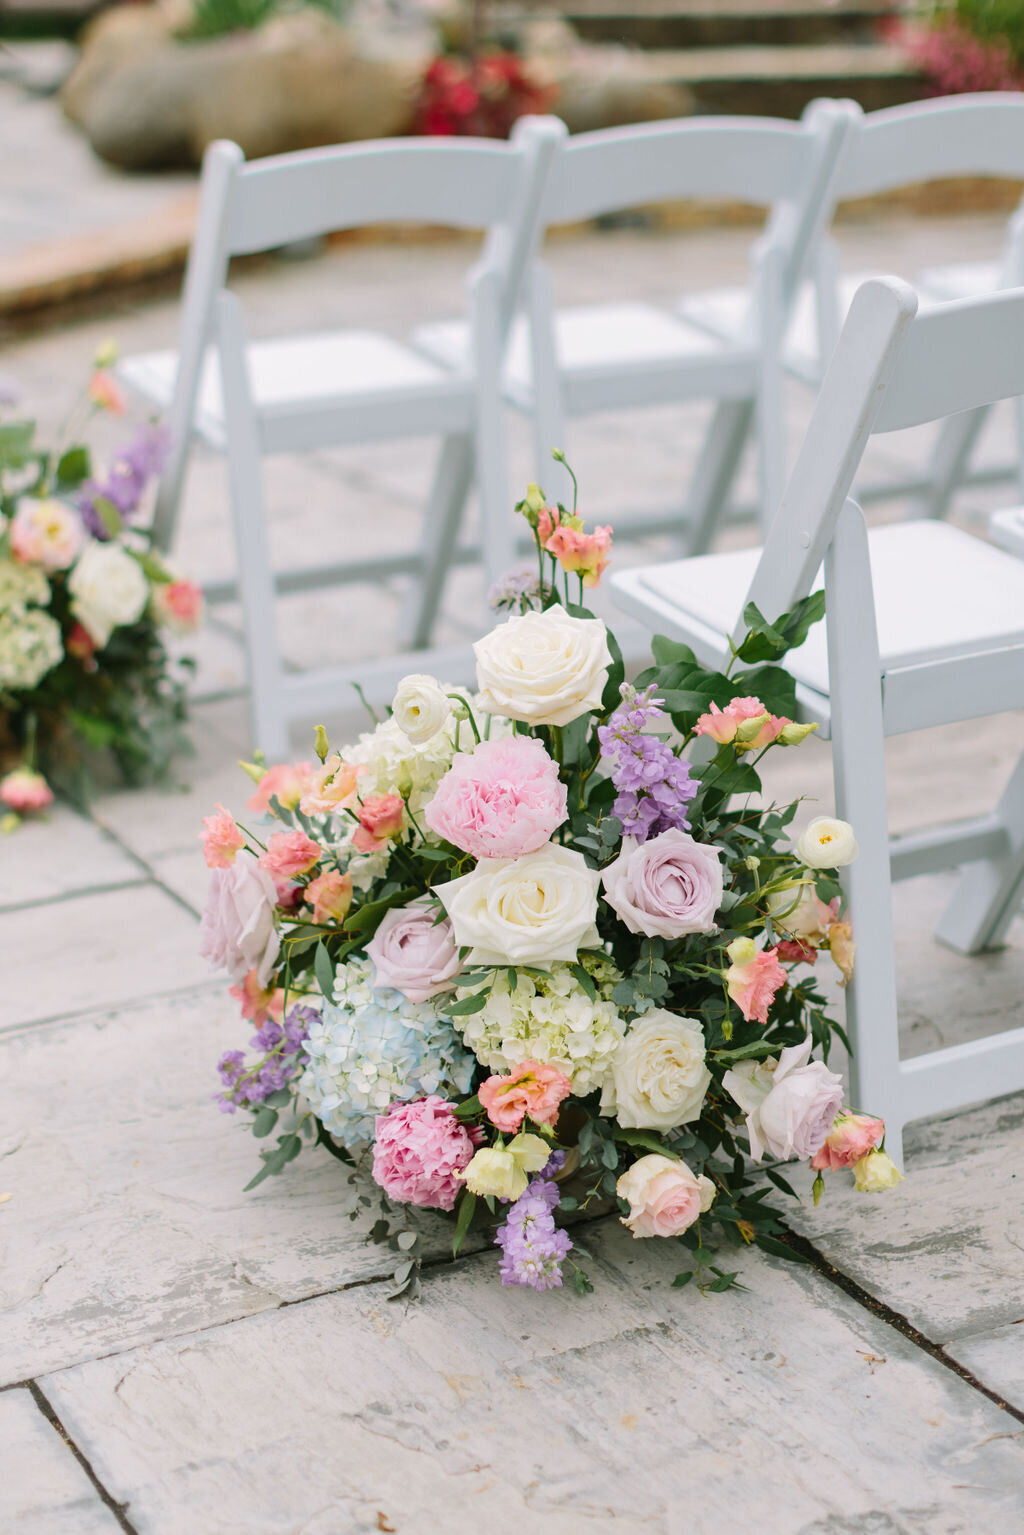 Wedding reception with chairs and flowers